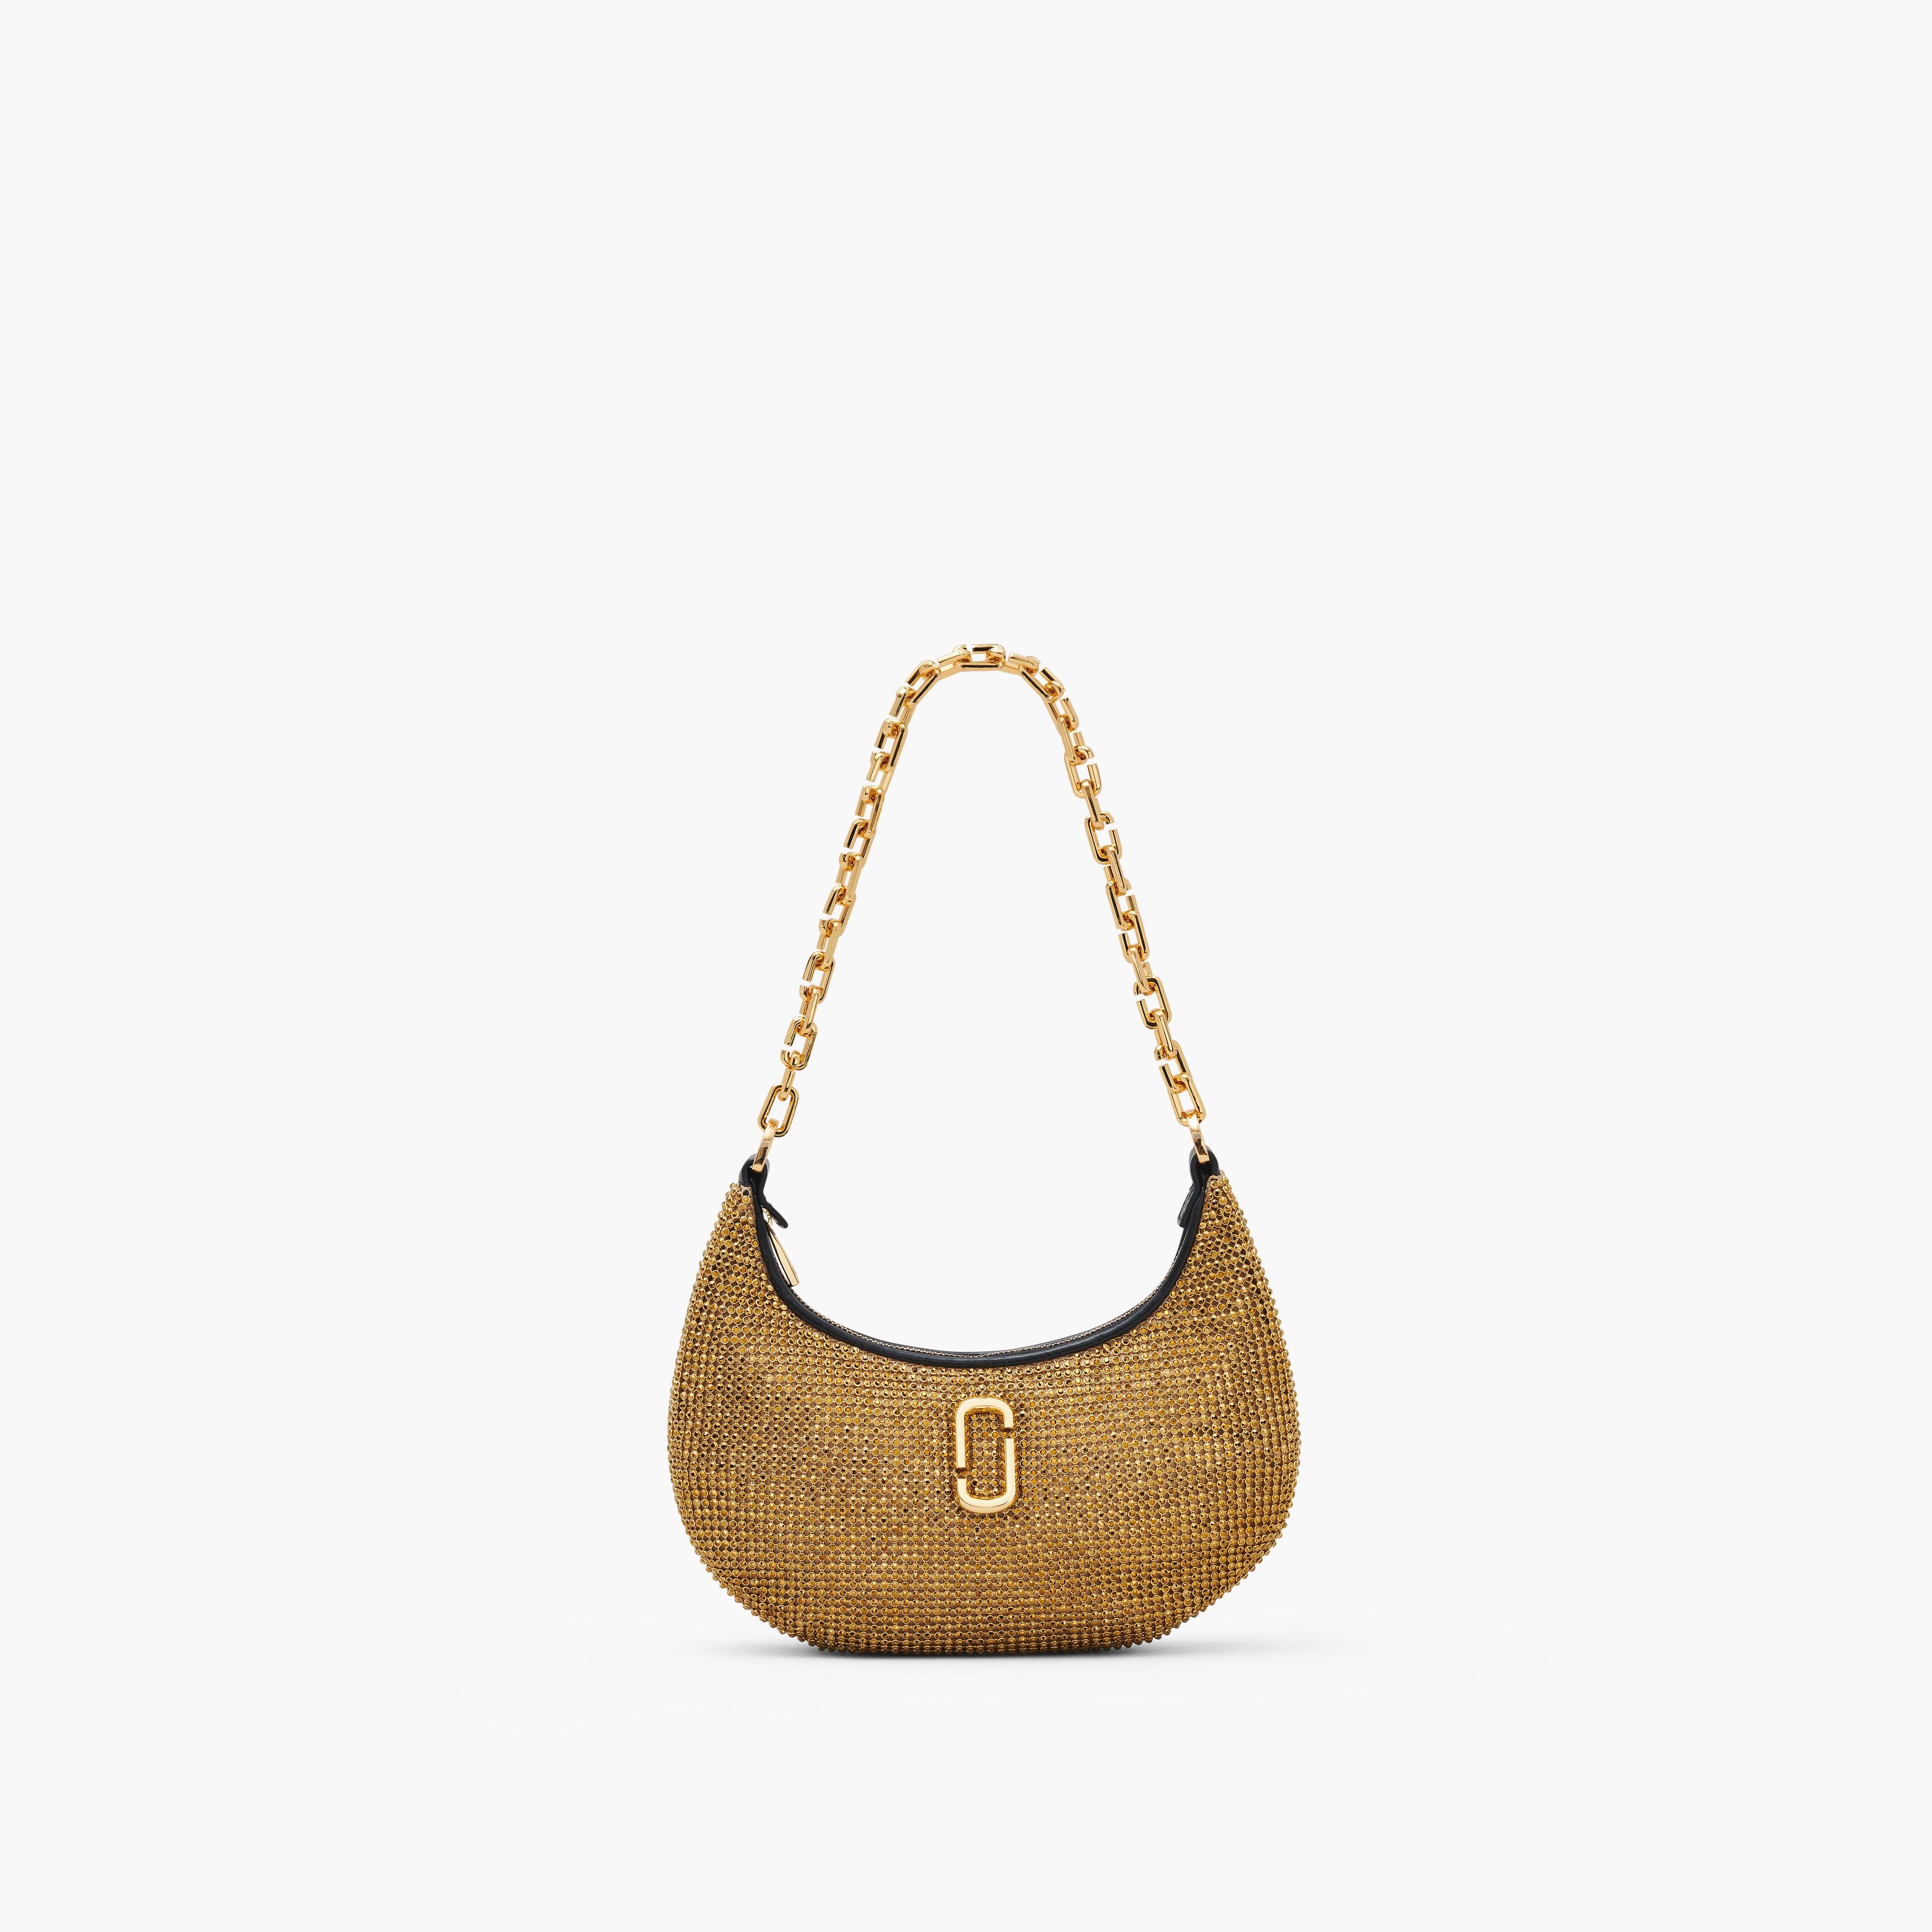 Marc by Marc jacobs The Rhinestone Curve Bag,GOLD